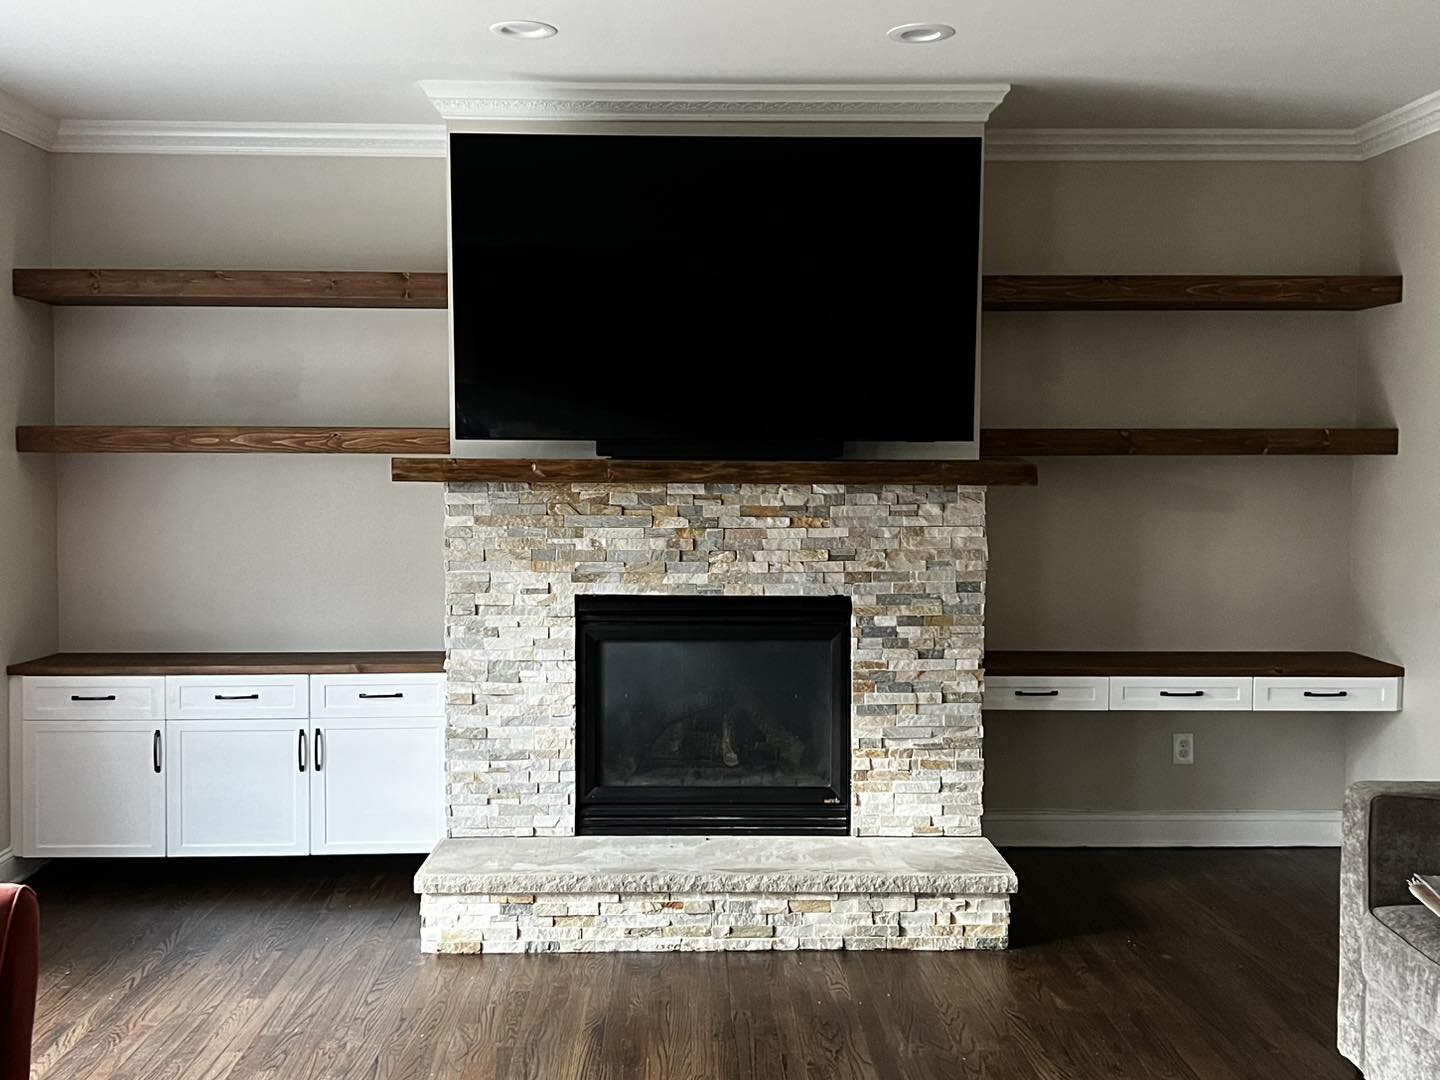 Built-in floating cabinets and desk with floating shelves. All the drawers and doors are soft close and the tops and shelves were made to match the existing fireplace mantle. 
.
.
.
.
#builtins #custommade #floatingshelves #interiordesign #livingroom